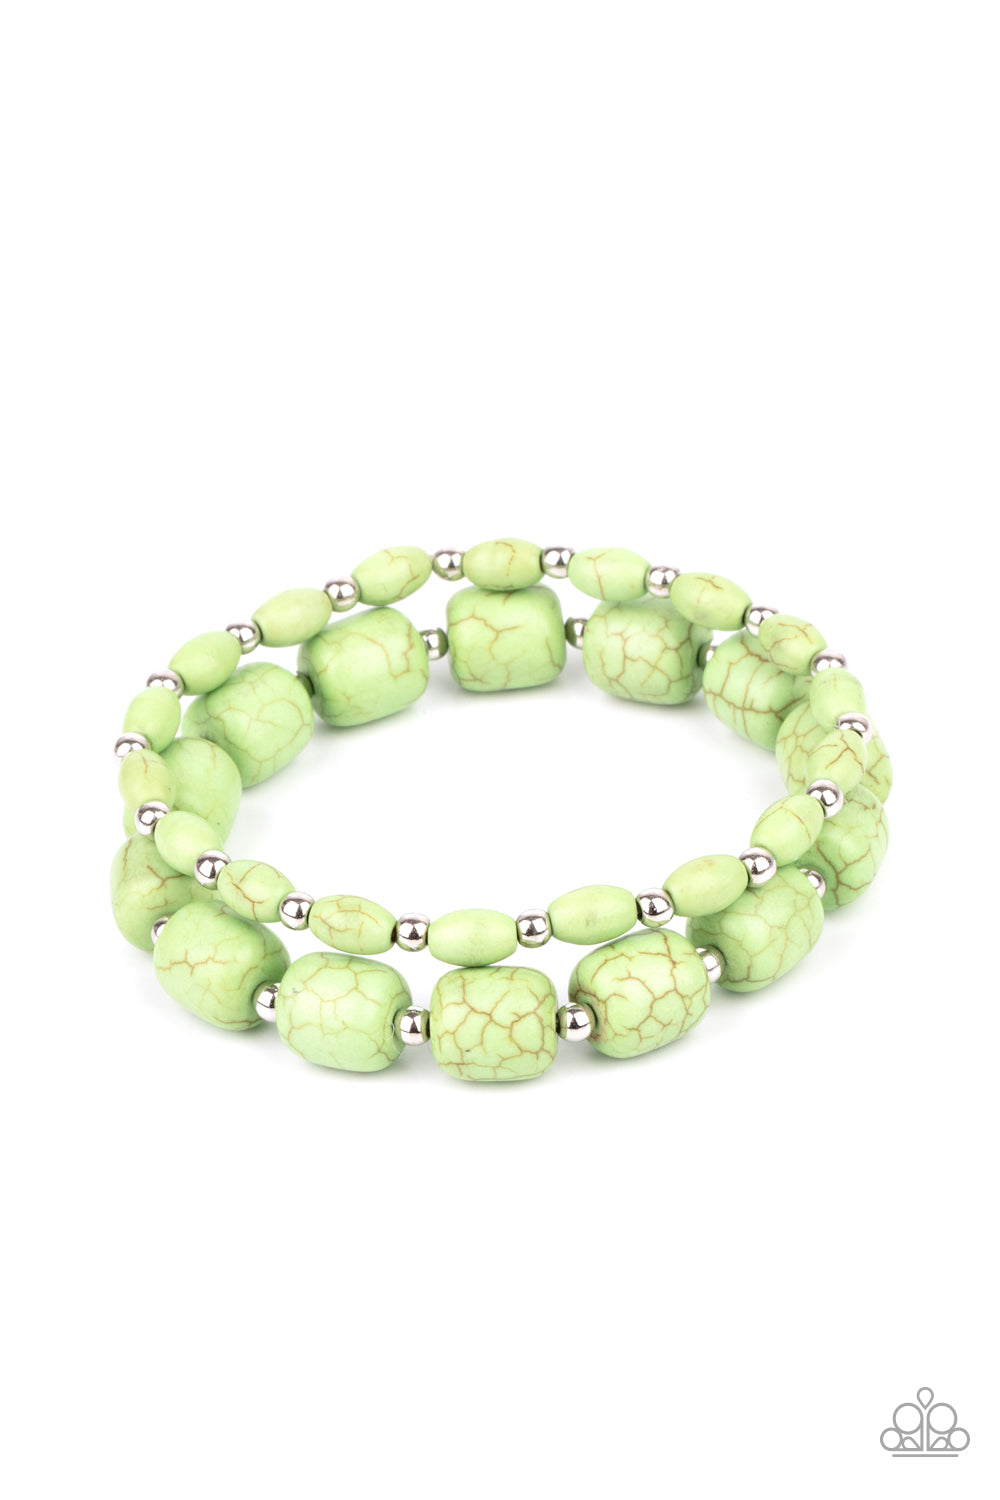 Colorfully Country - Green - VJ Bedazzled Jewelry